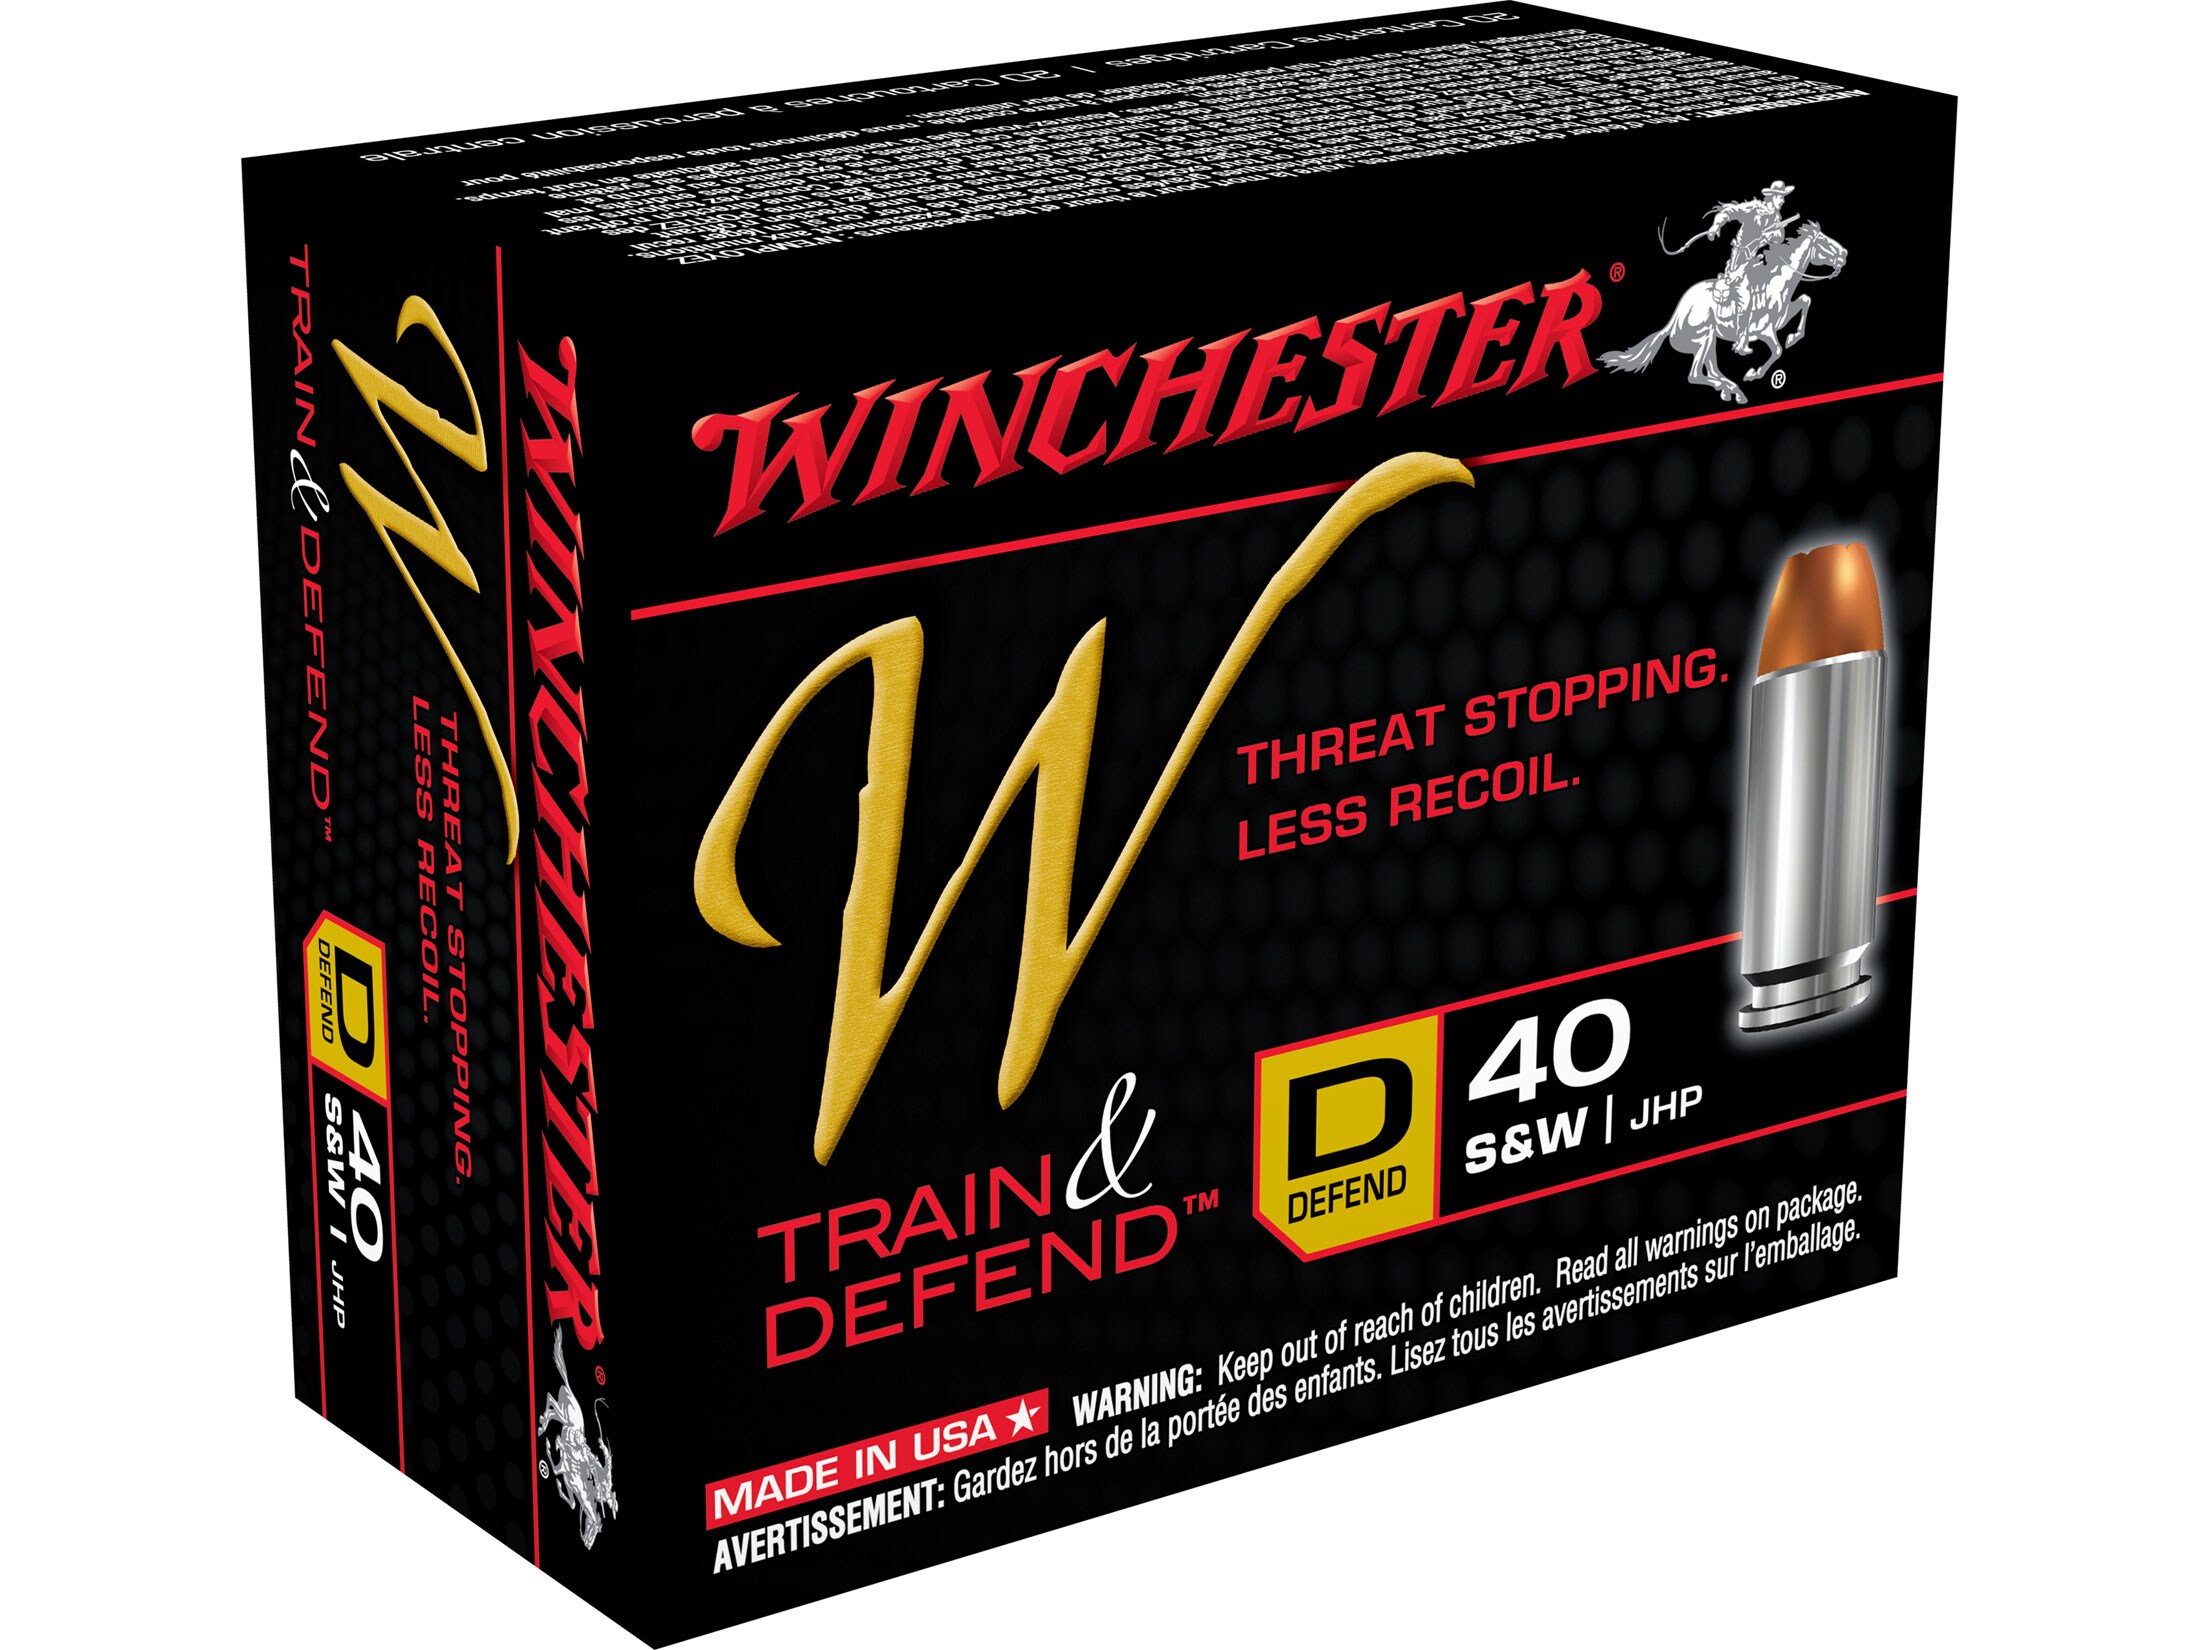 Winchester W Defend Reduced Recoil Ammo 40 S&W 180 Grain Jacketed.